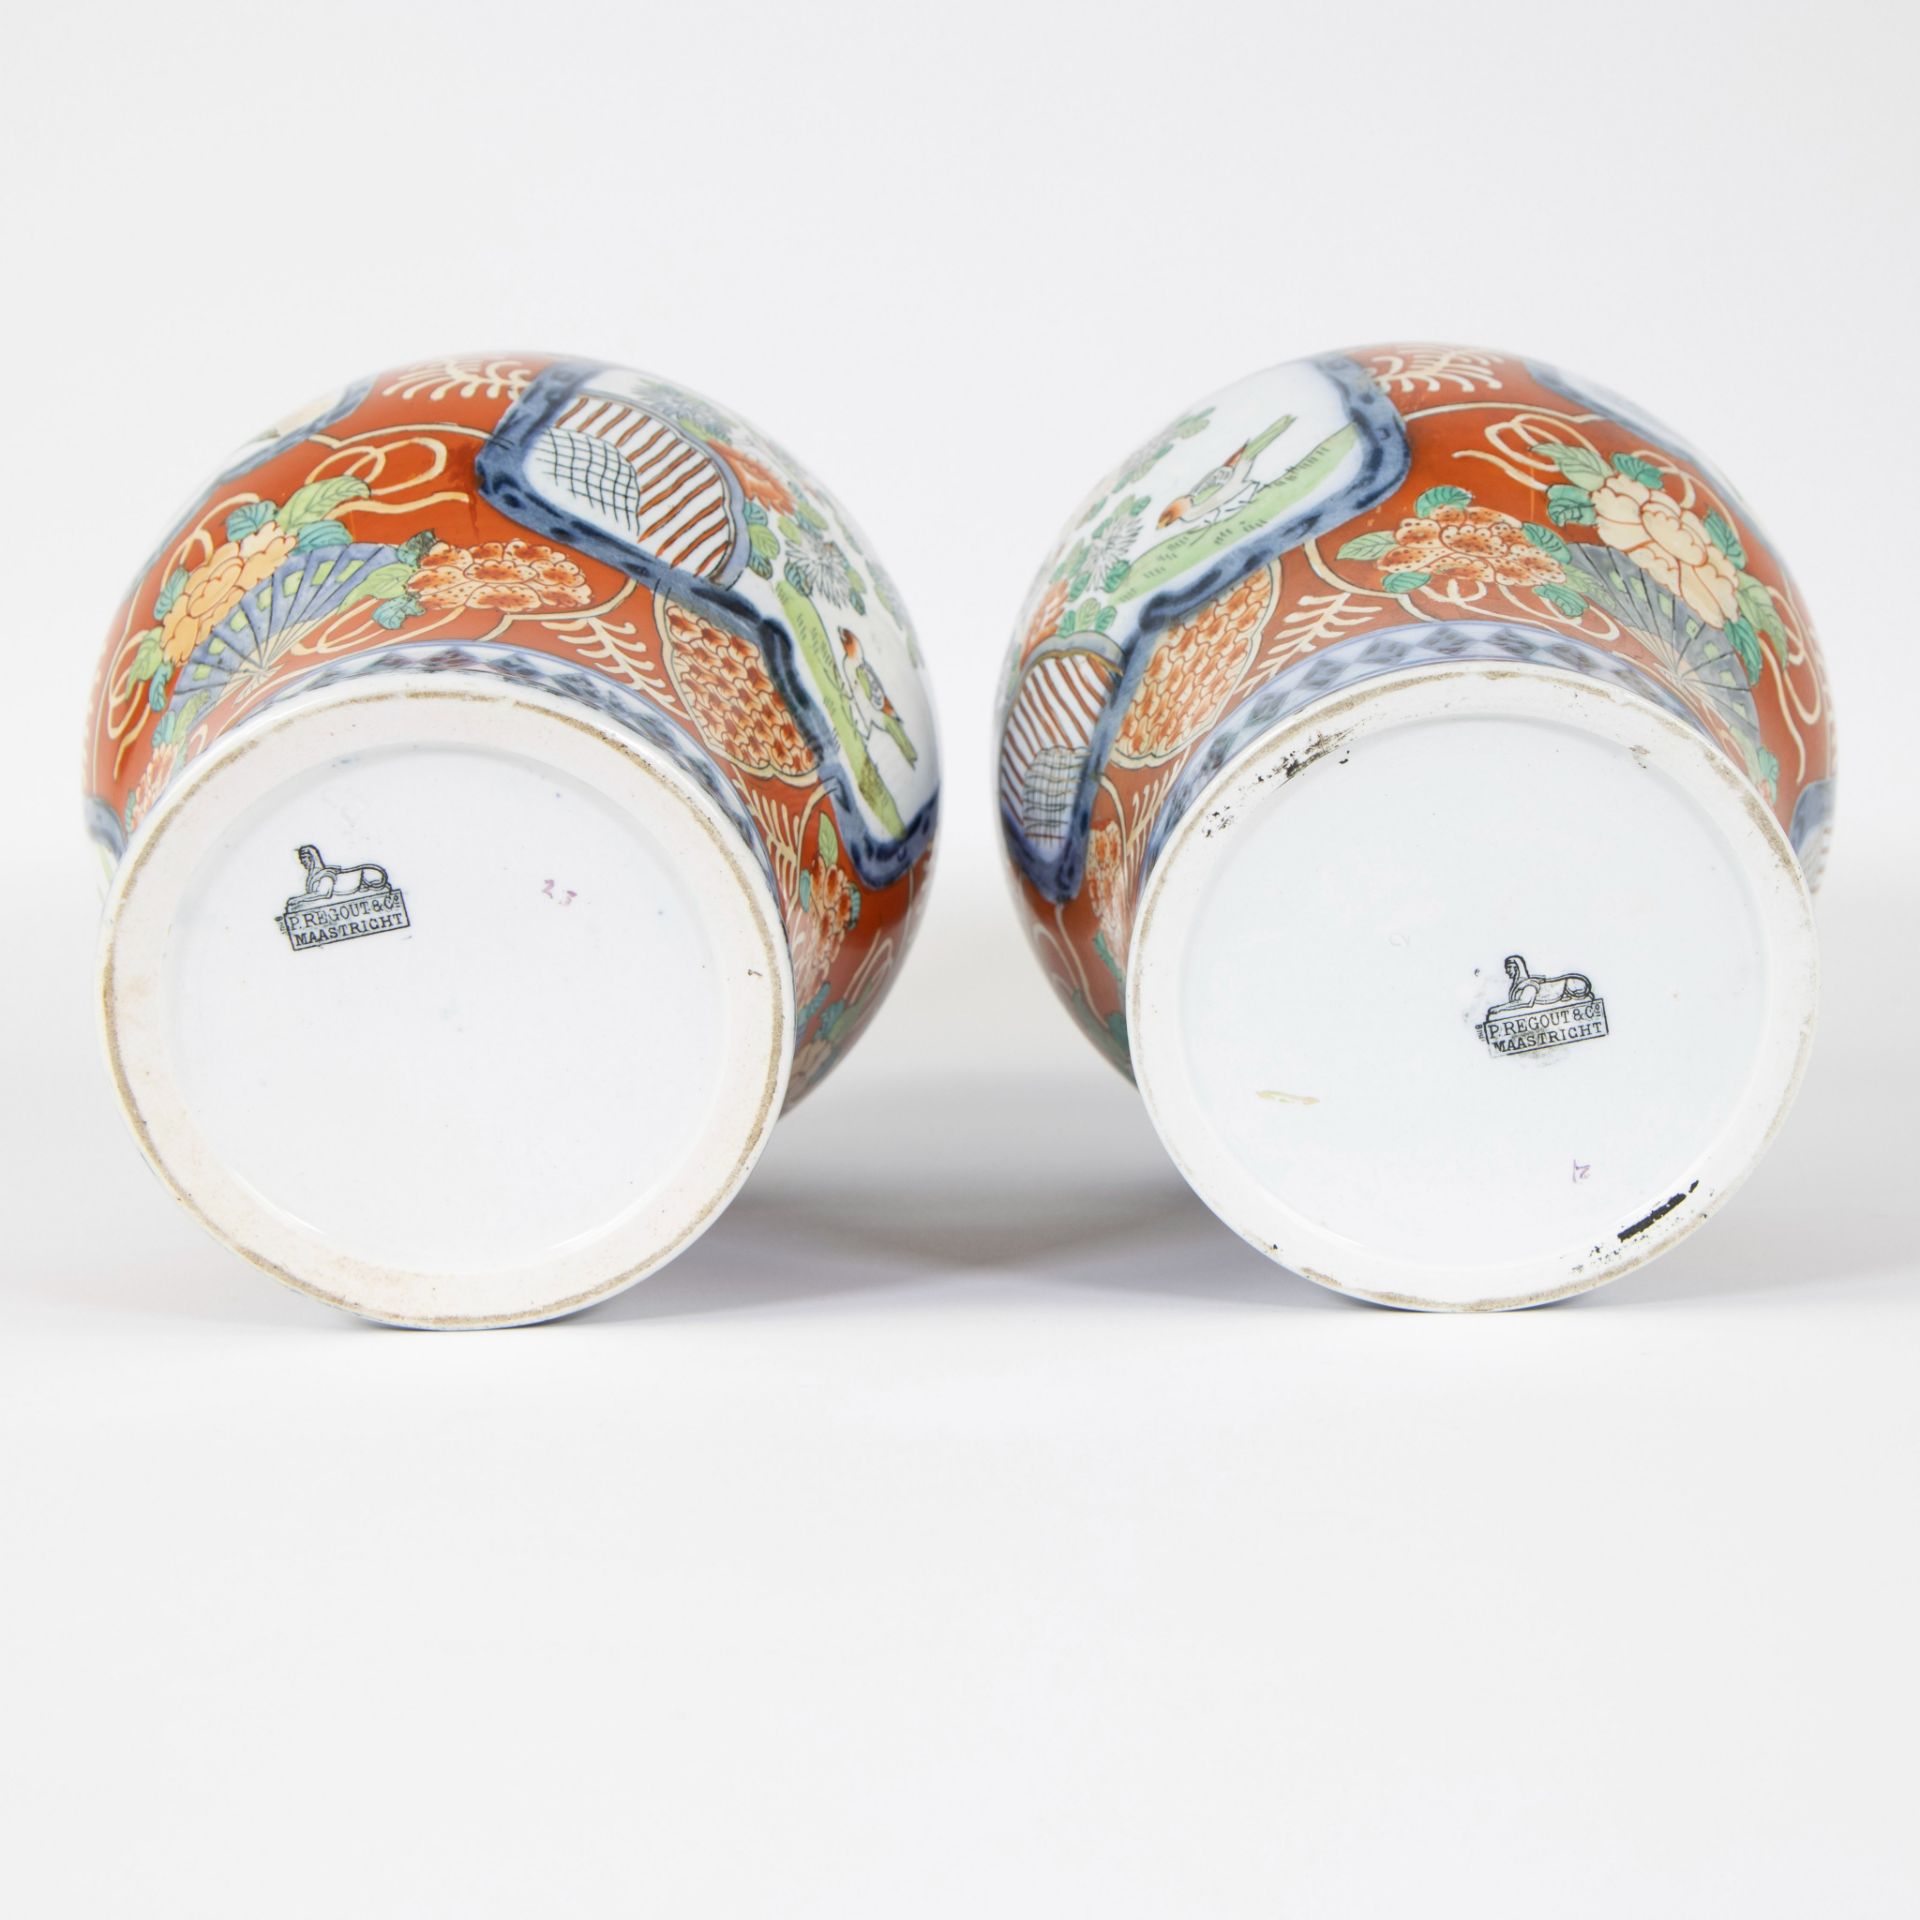 Pair of lidded vases P. Regout & Co, Maastricht, marked - Image 6 of 7